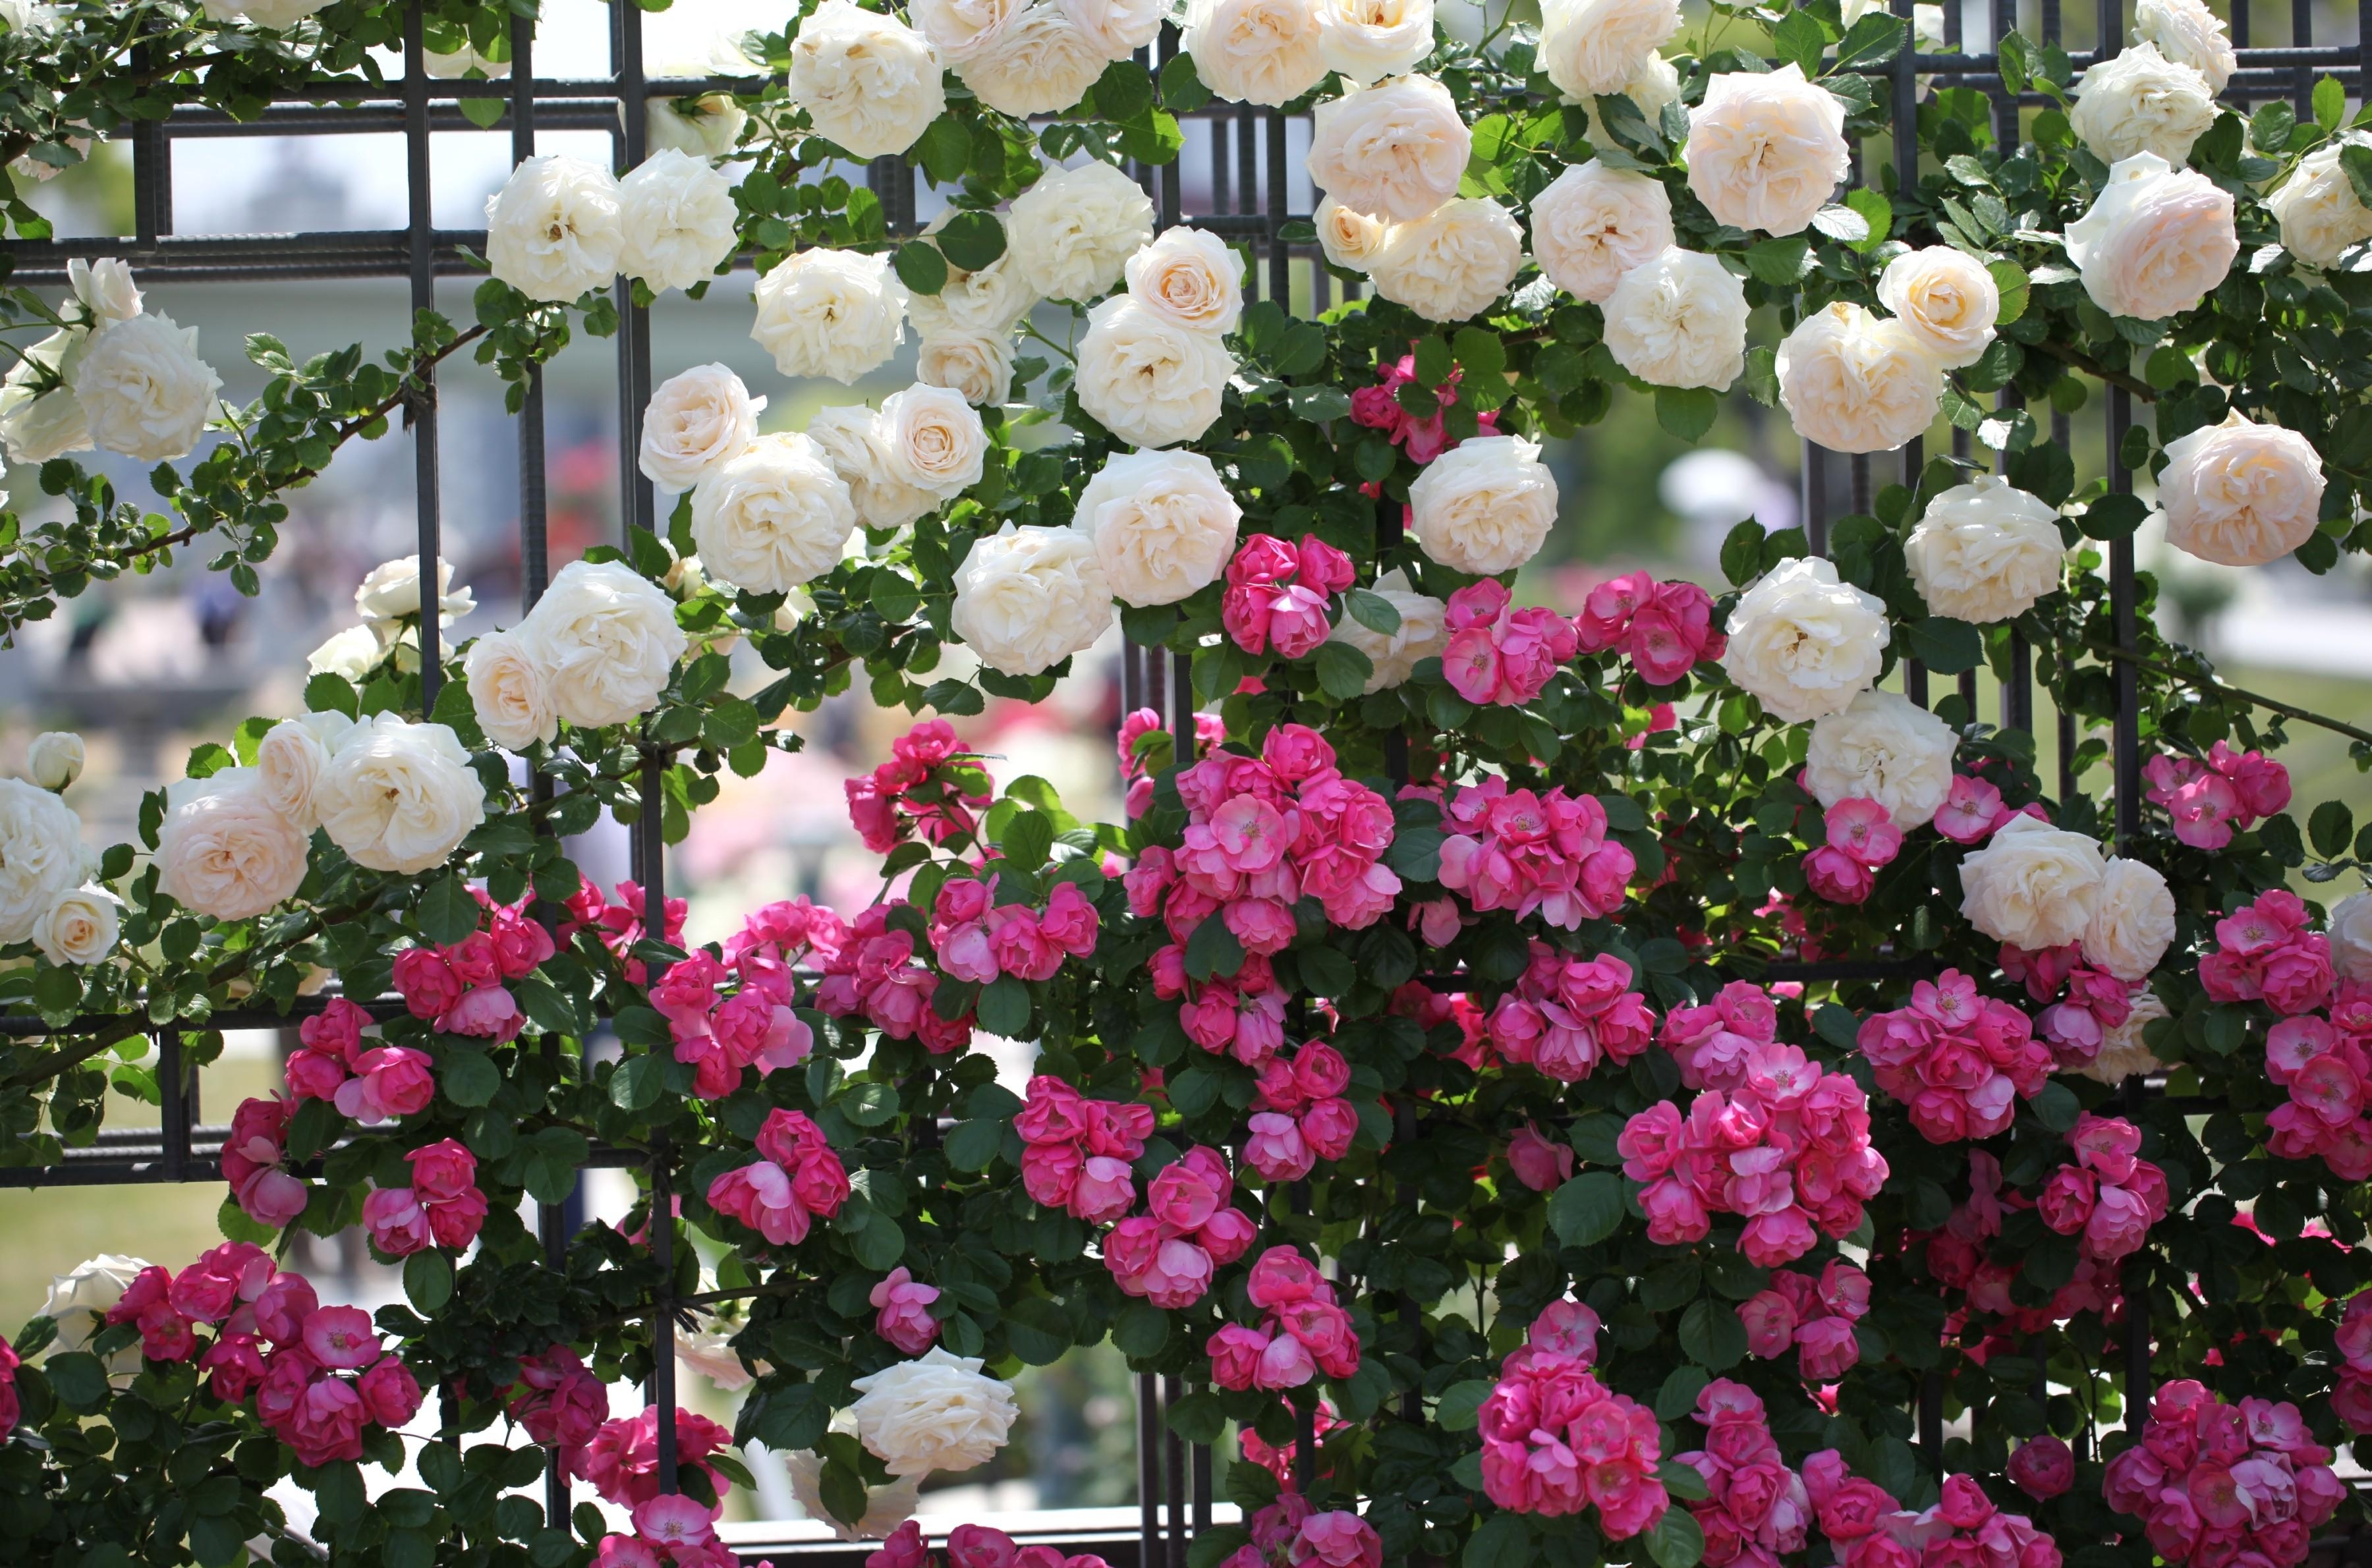 roses, flowers, it's beautiful, greens, fence, handsomely, different